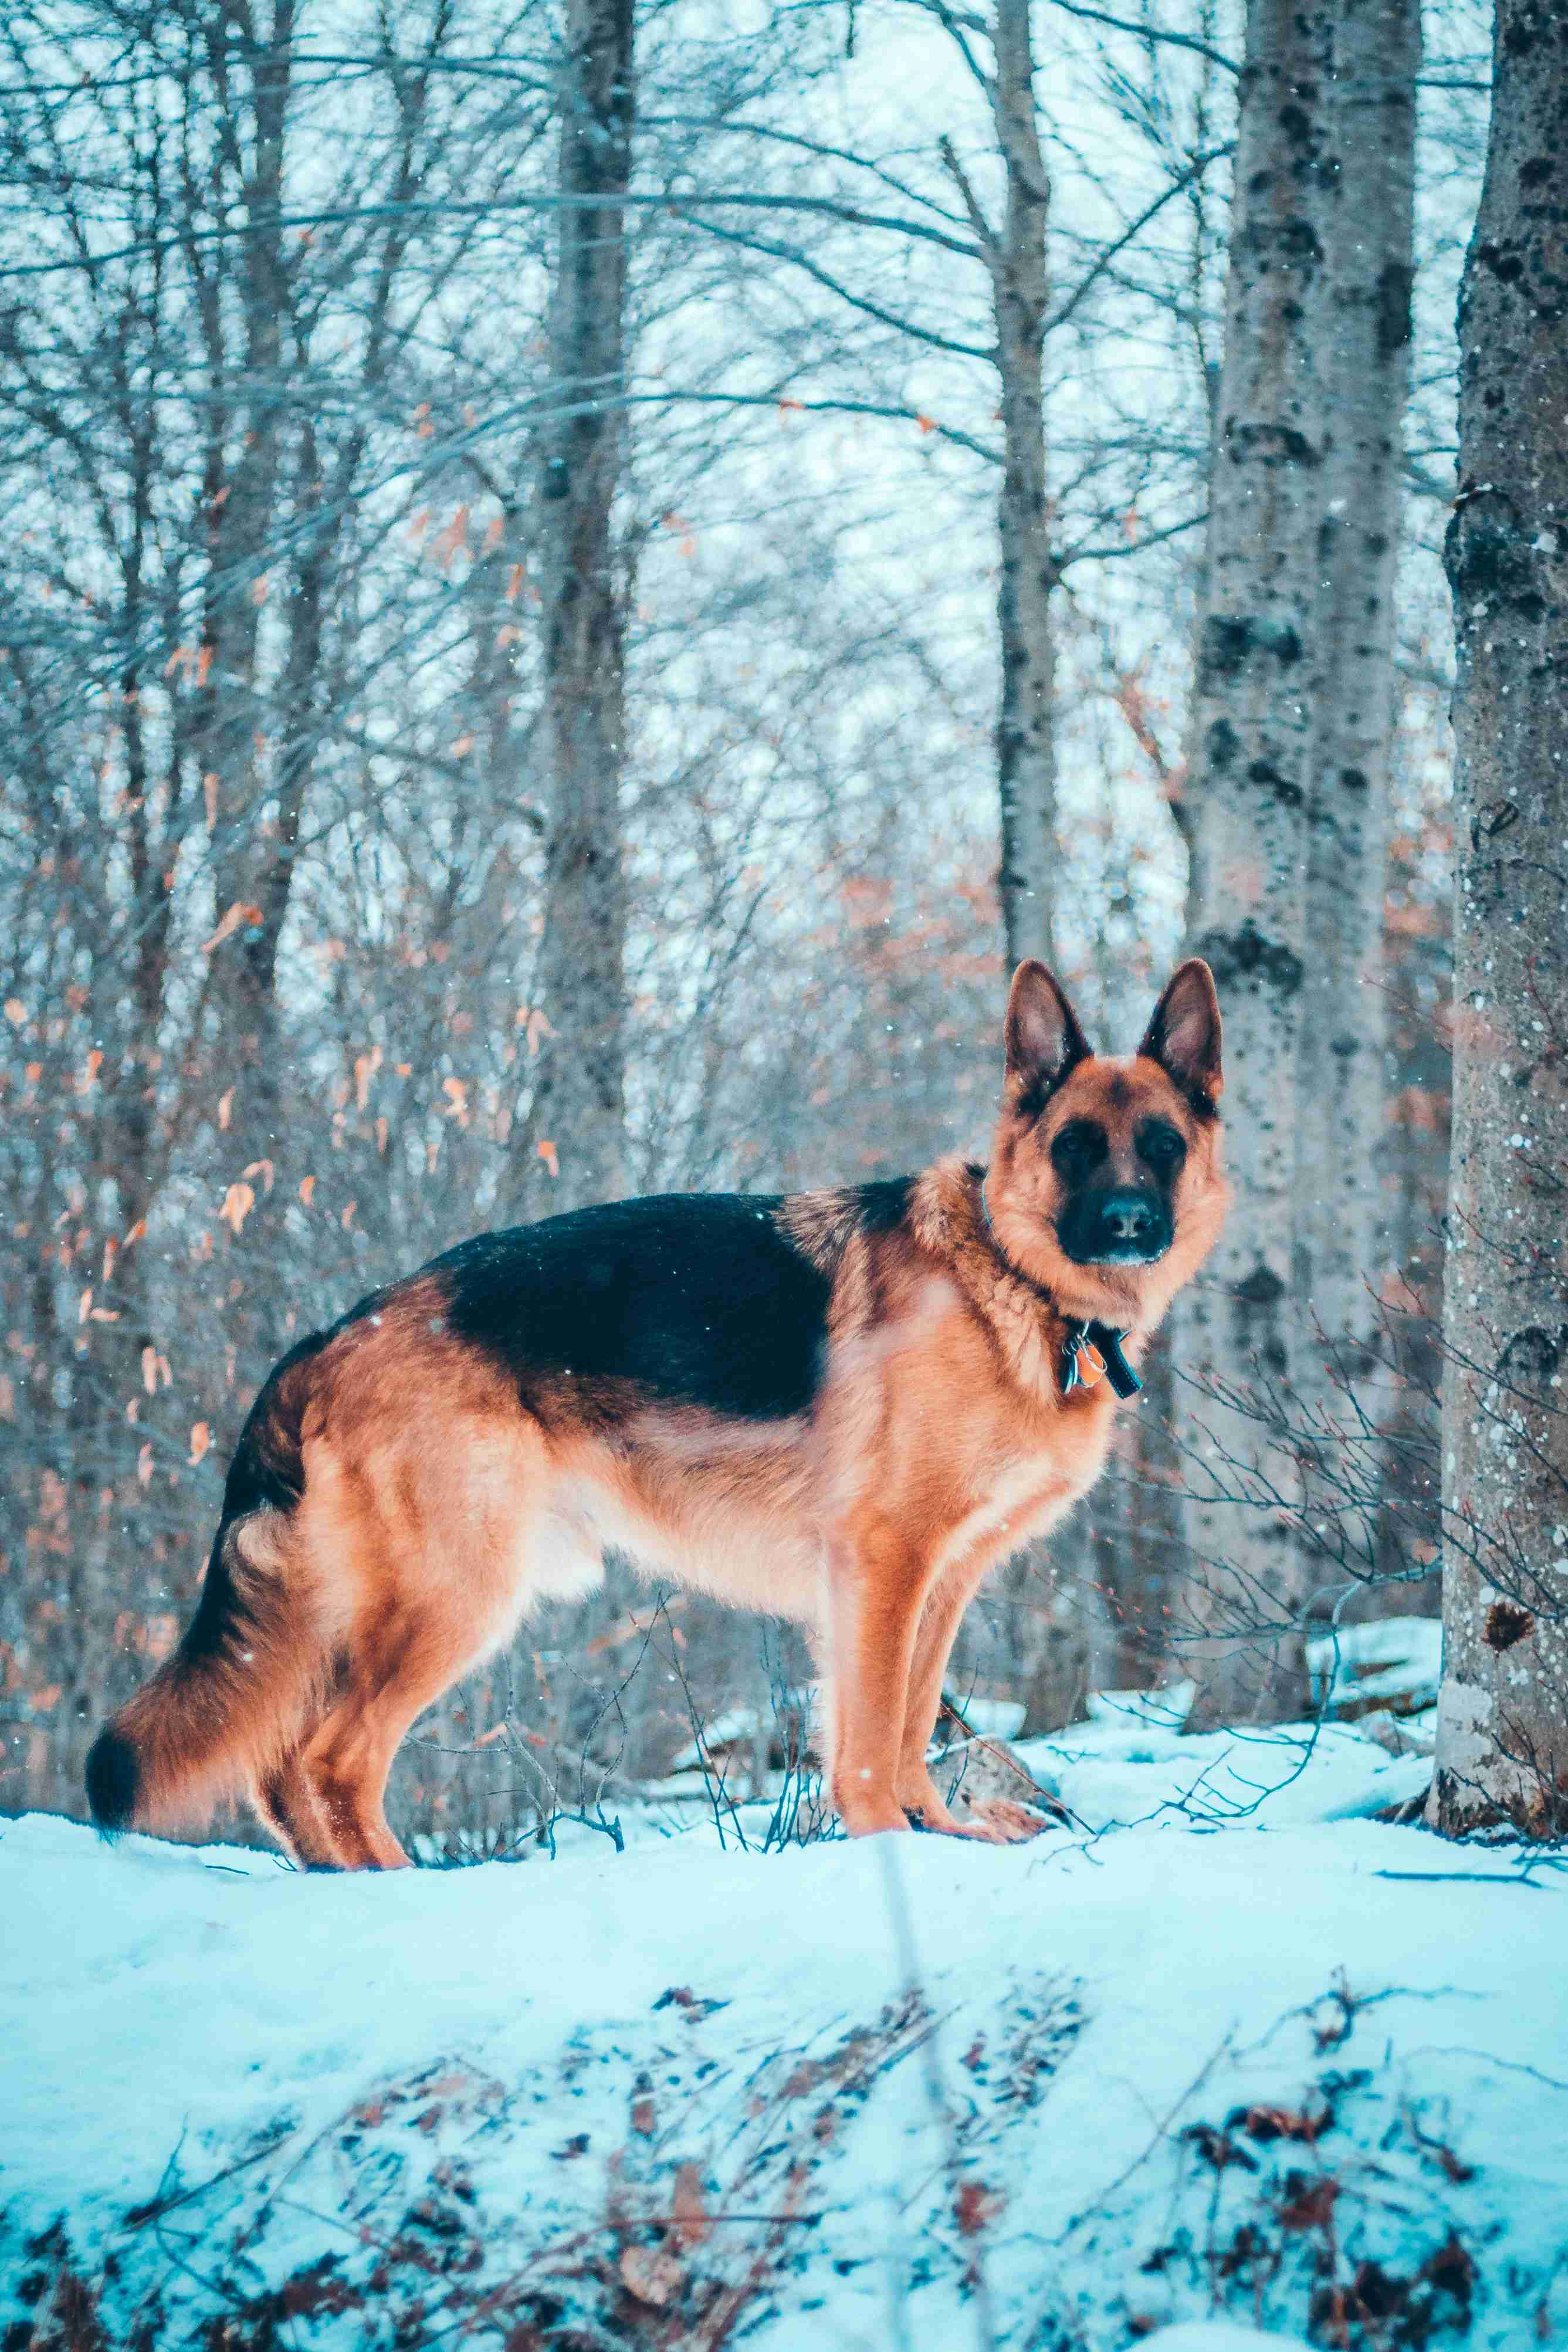 Are German shepherds prone to any specific eye issues?